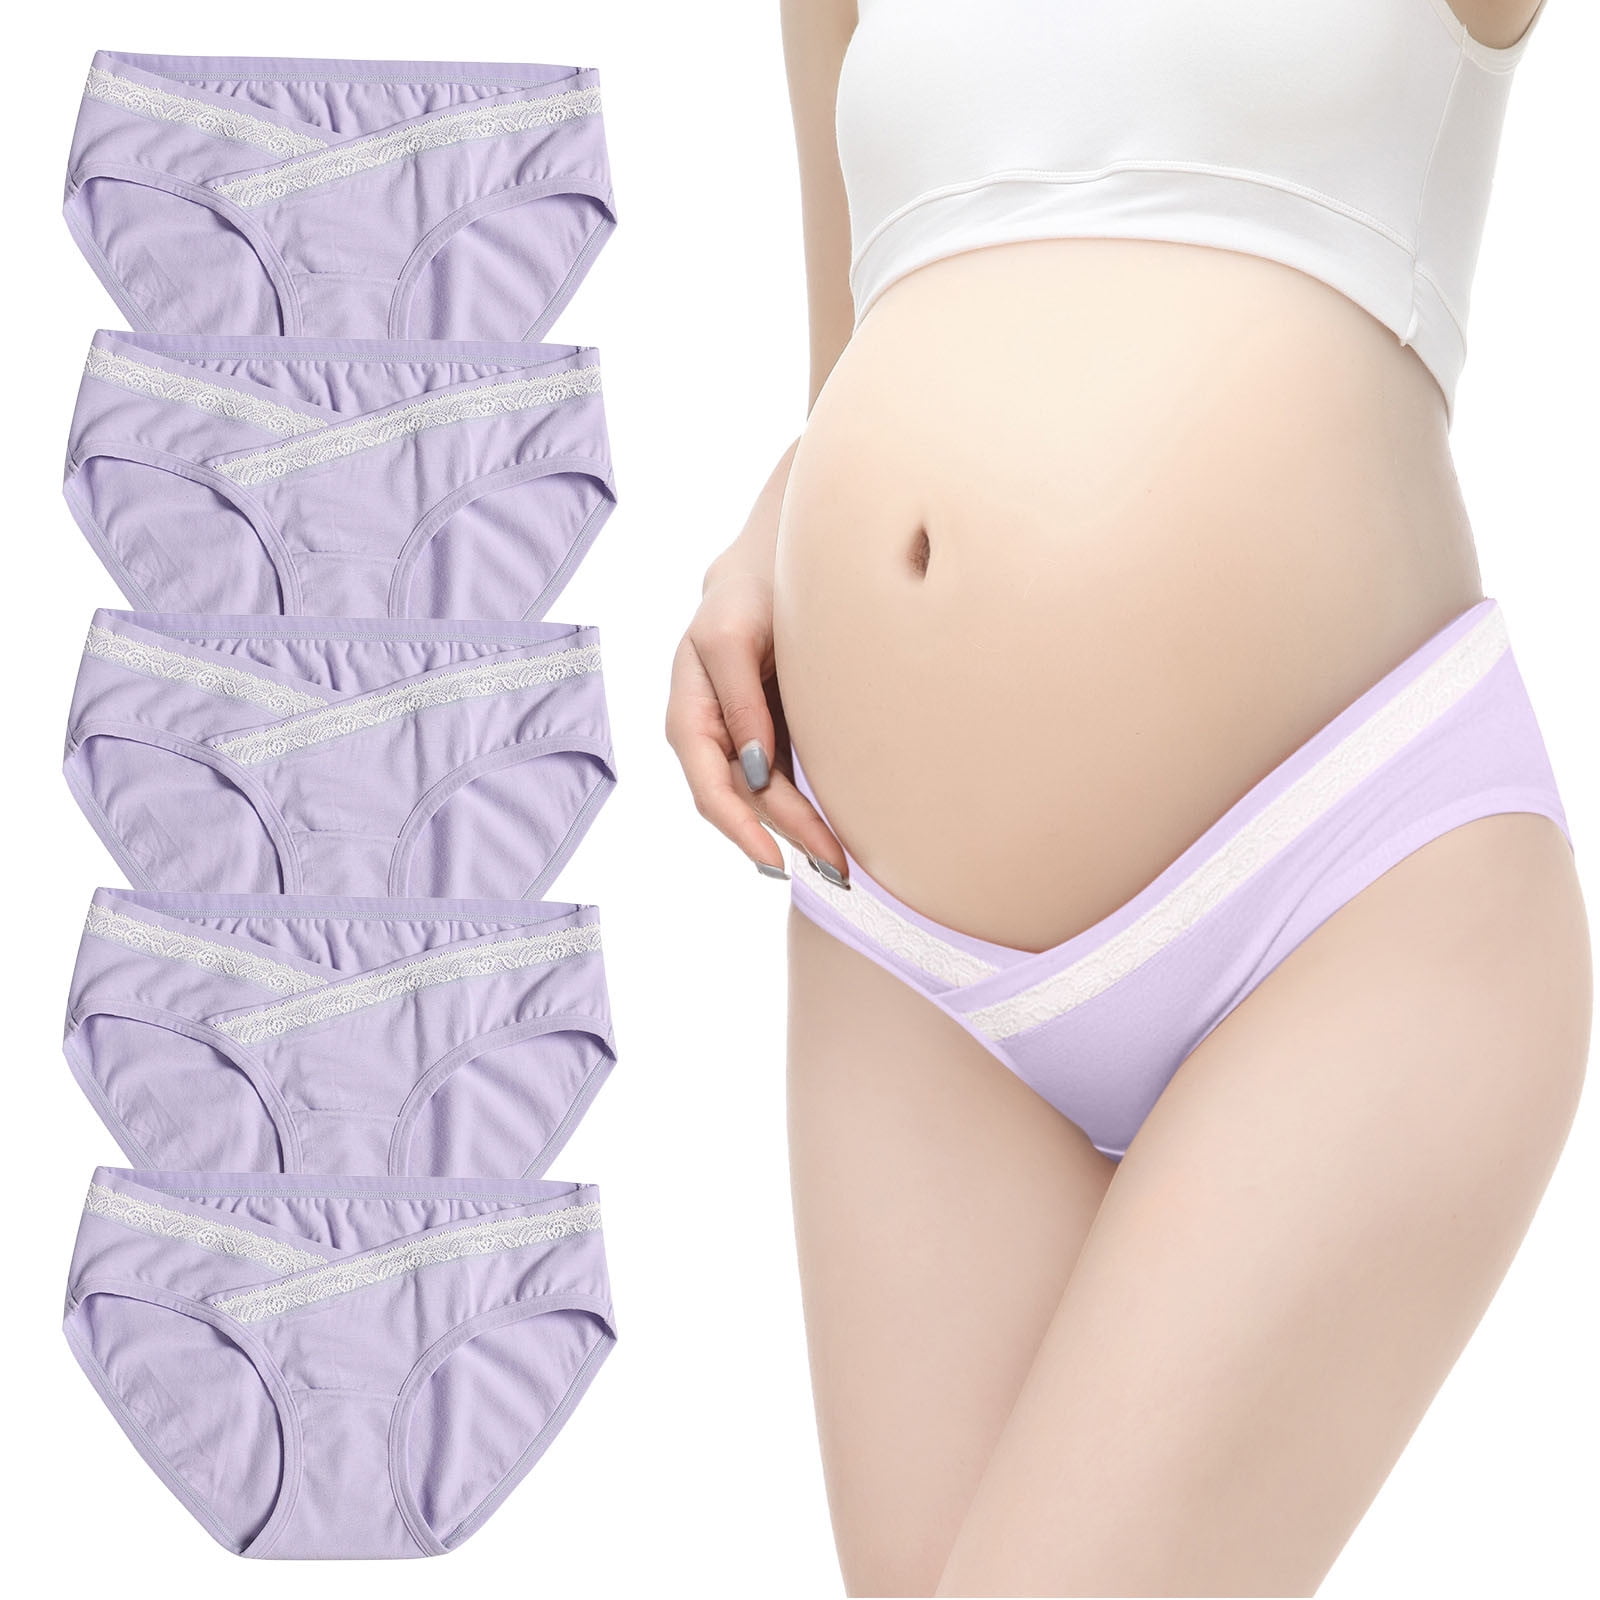 Kayannuo Cotton Underwear For Women Christmas Clearance Women's